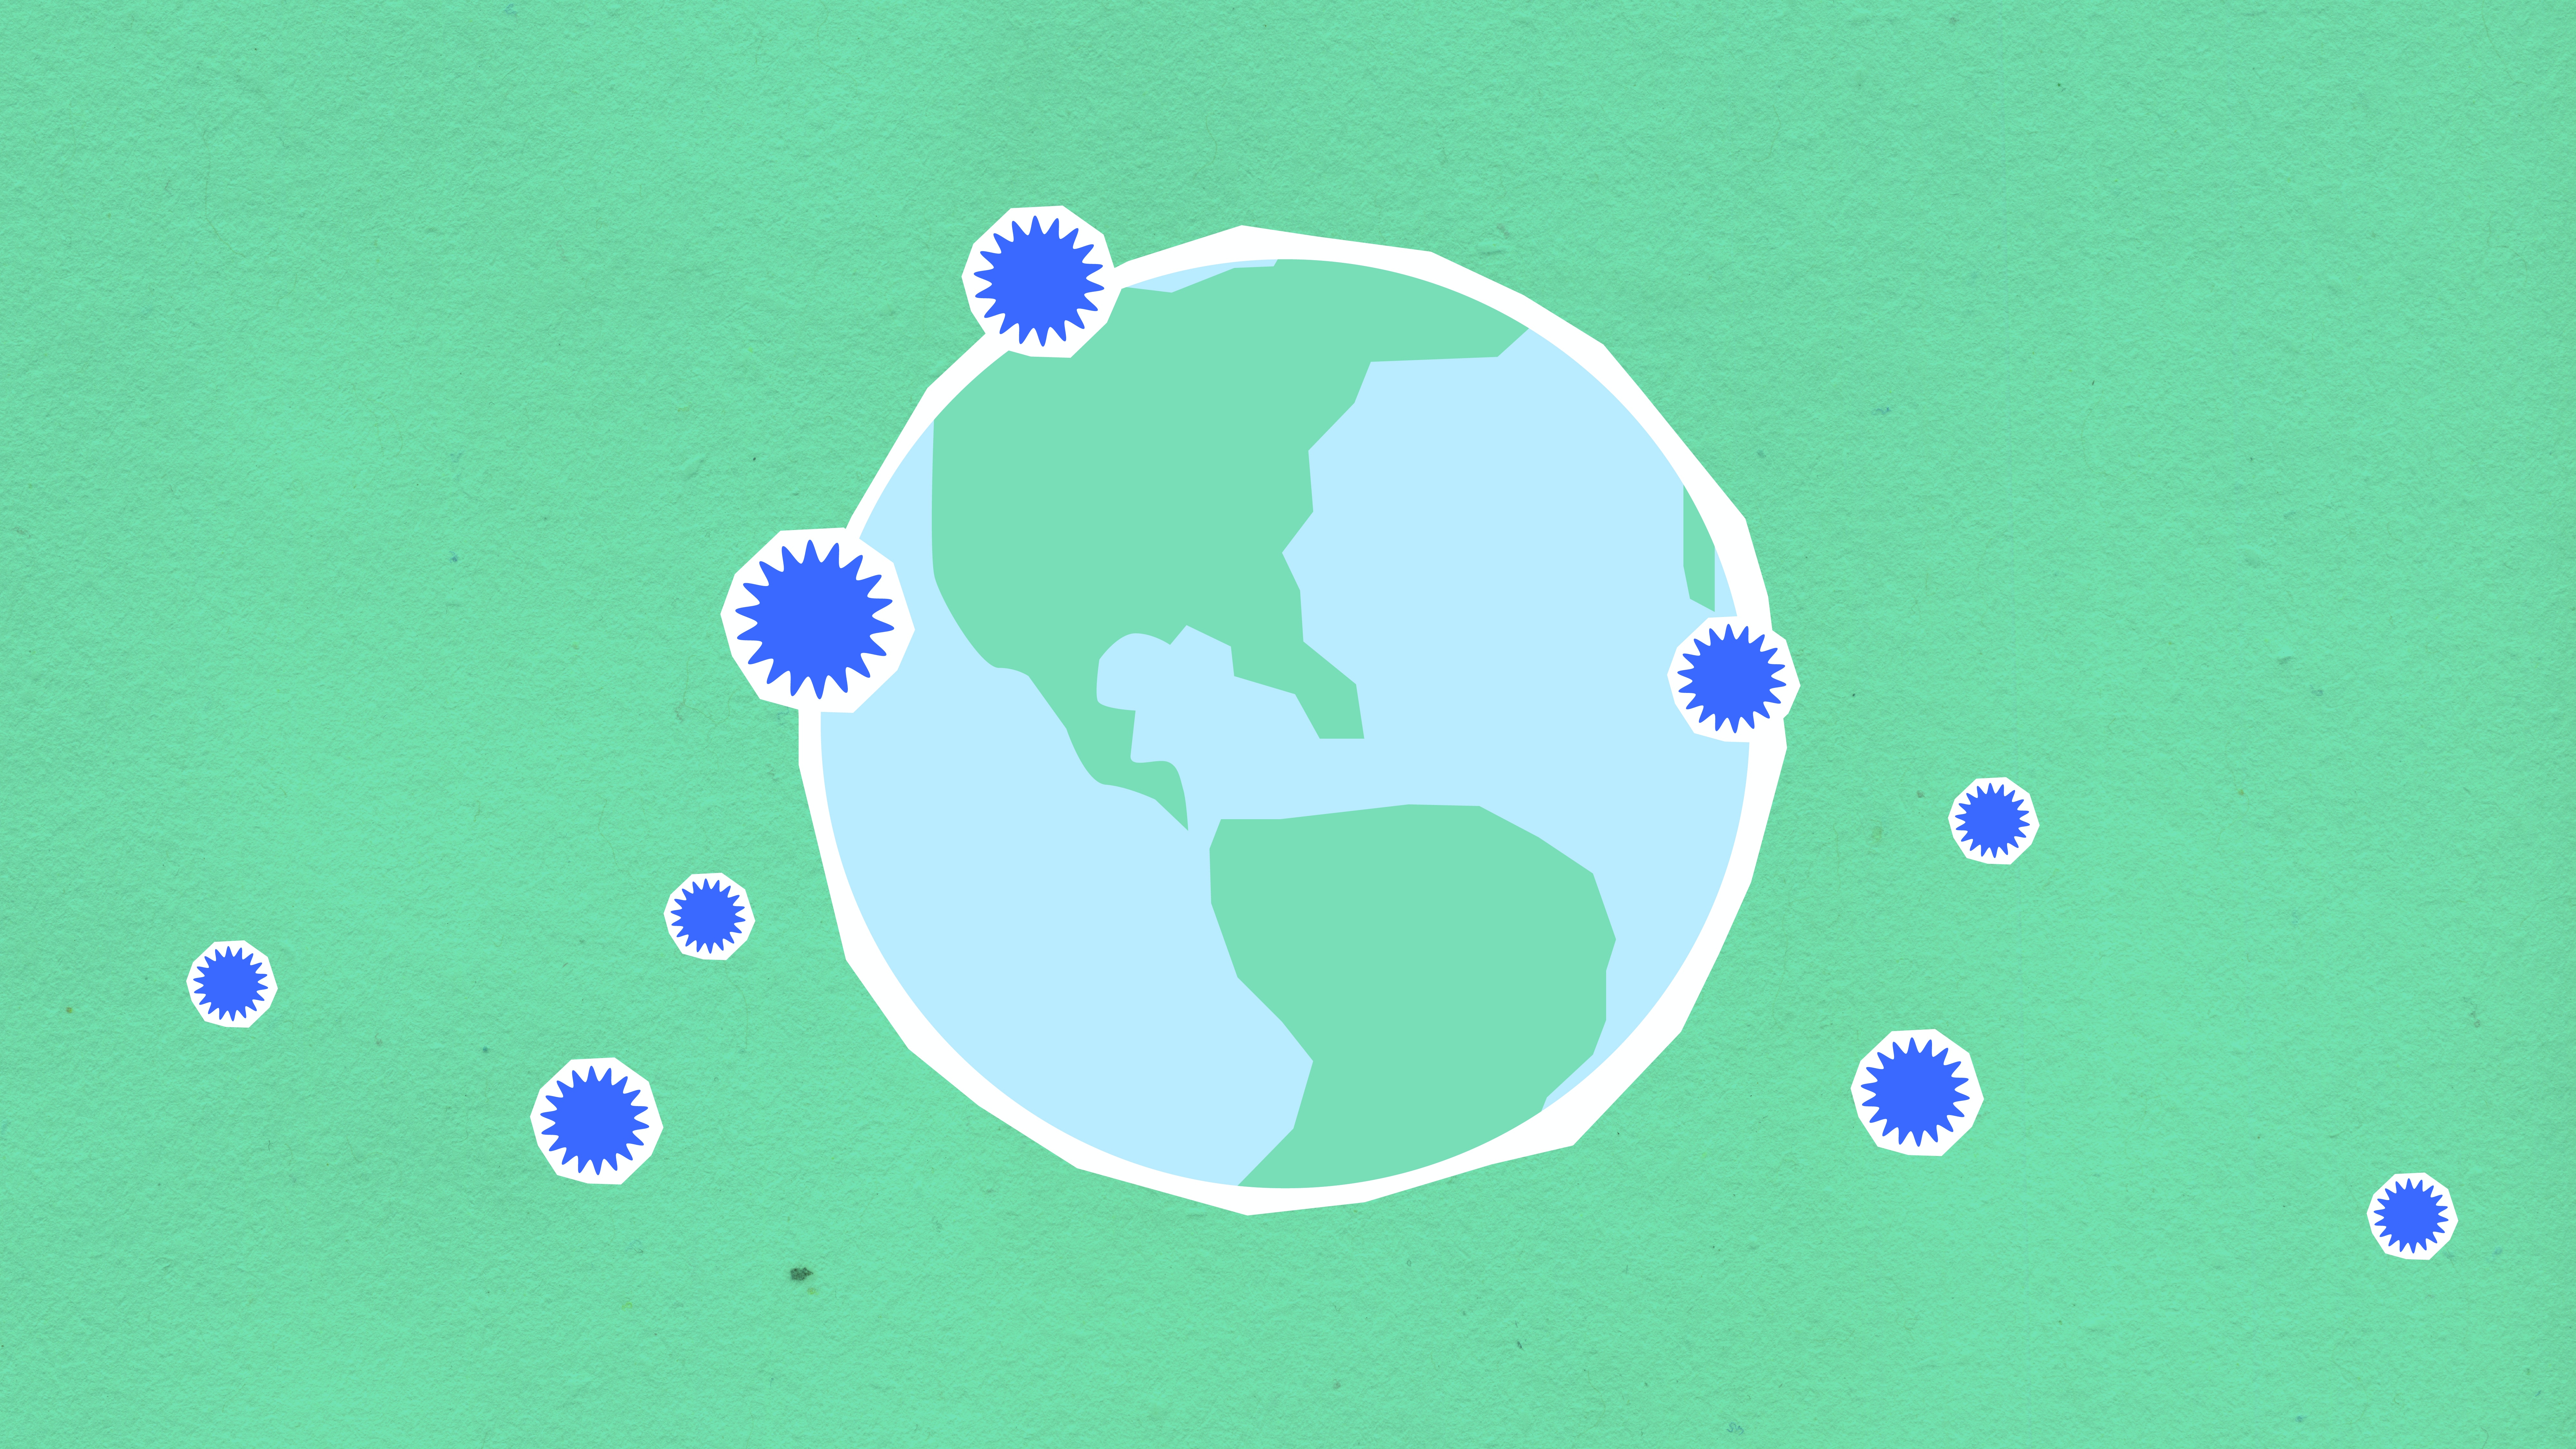 Illustration of the globe on a green background with blue virus-like dots around it.